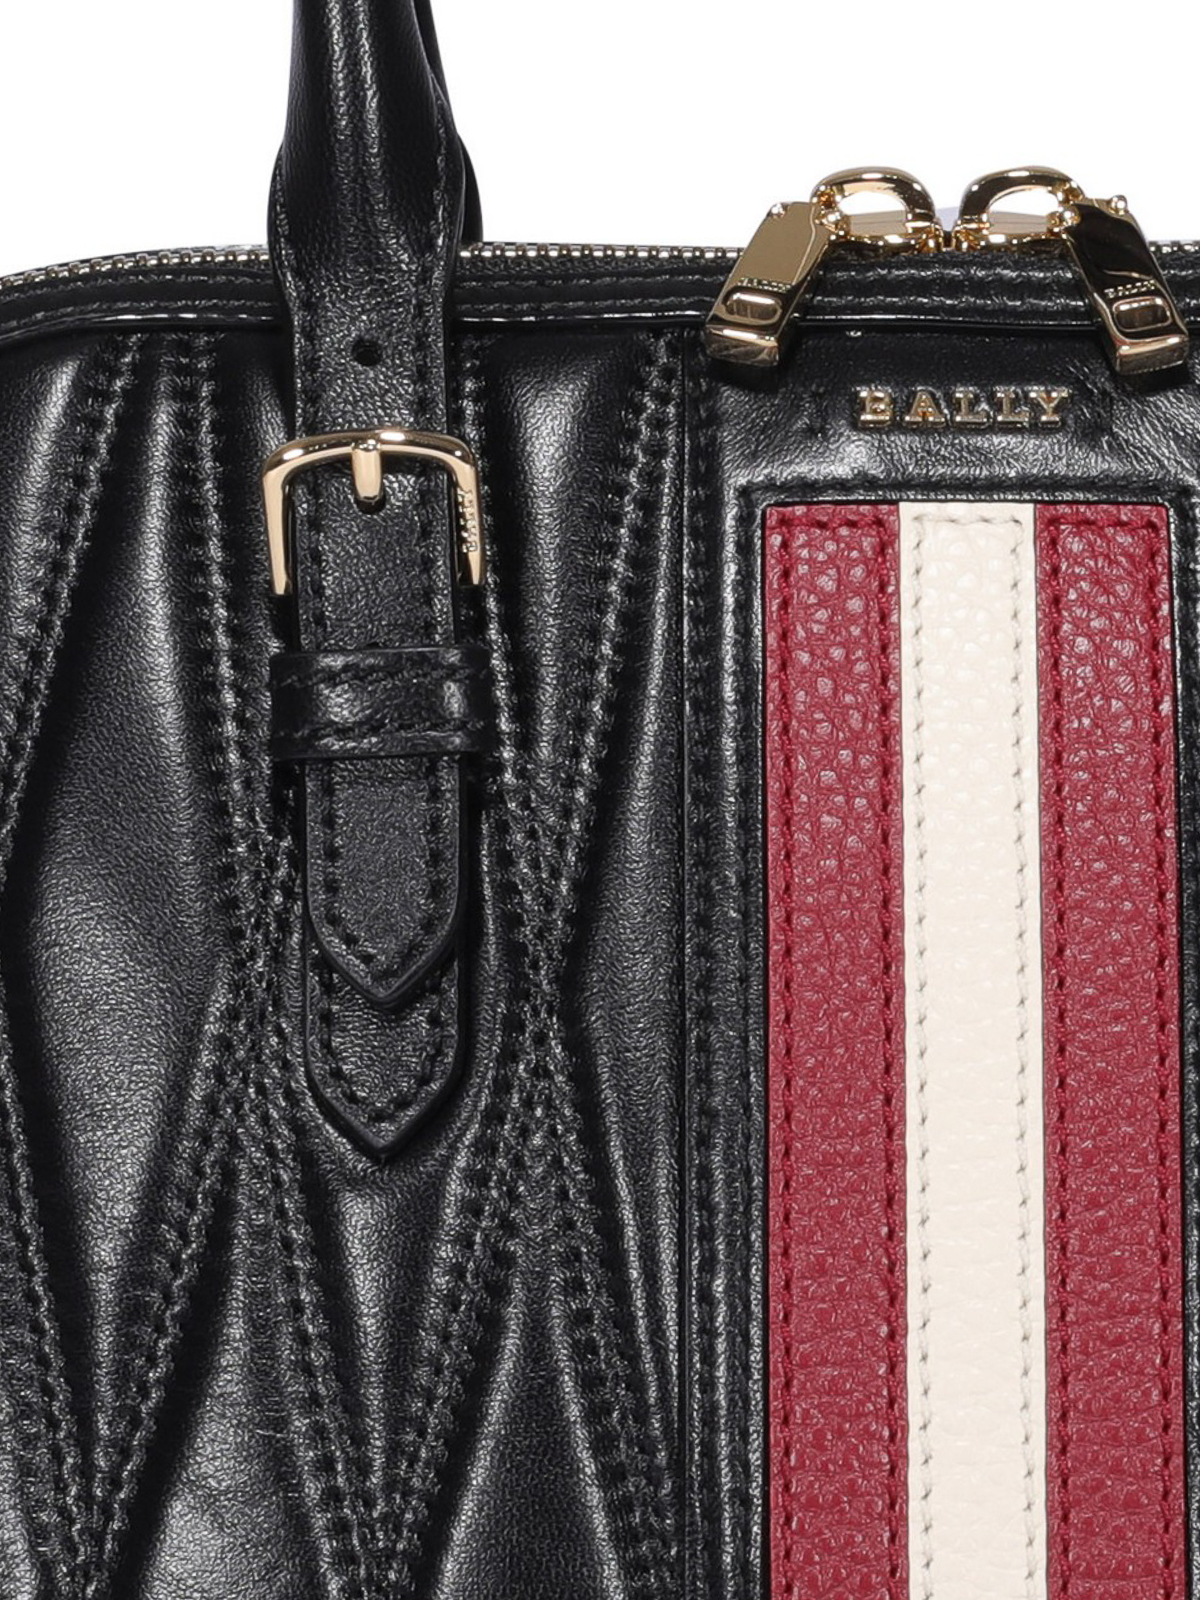 Bally, Bags, Bally Quilted Leather Purse